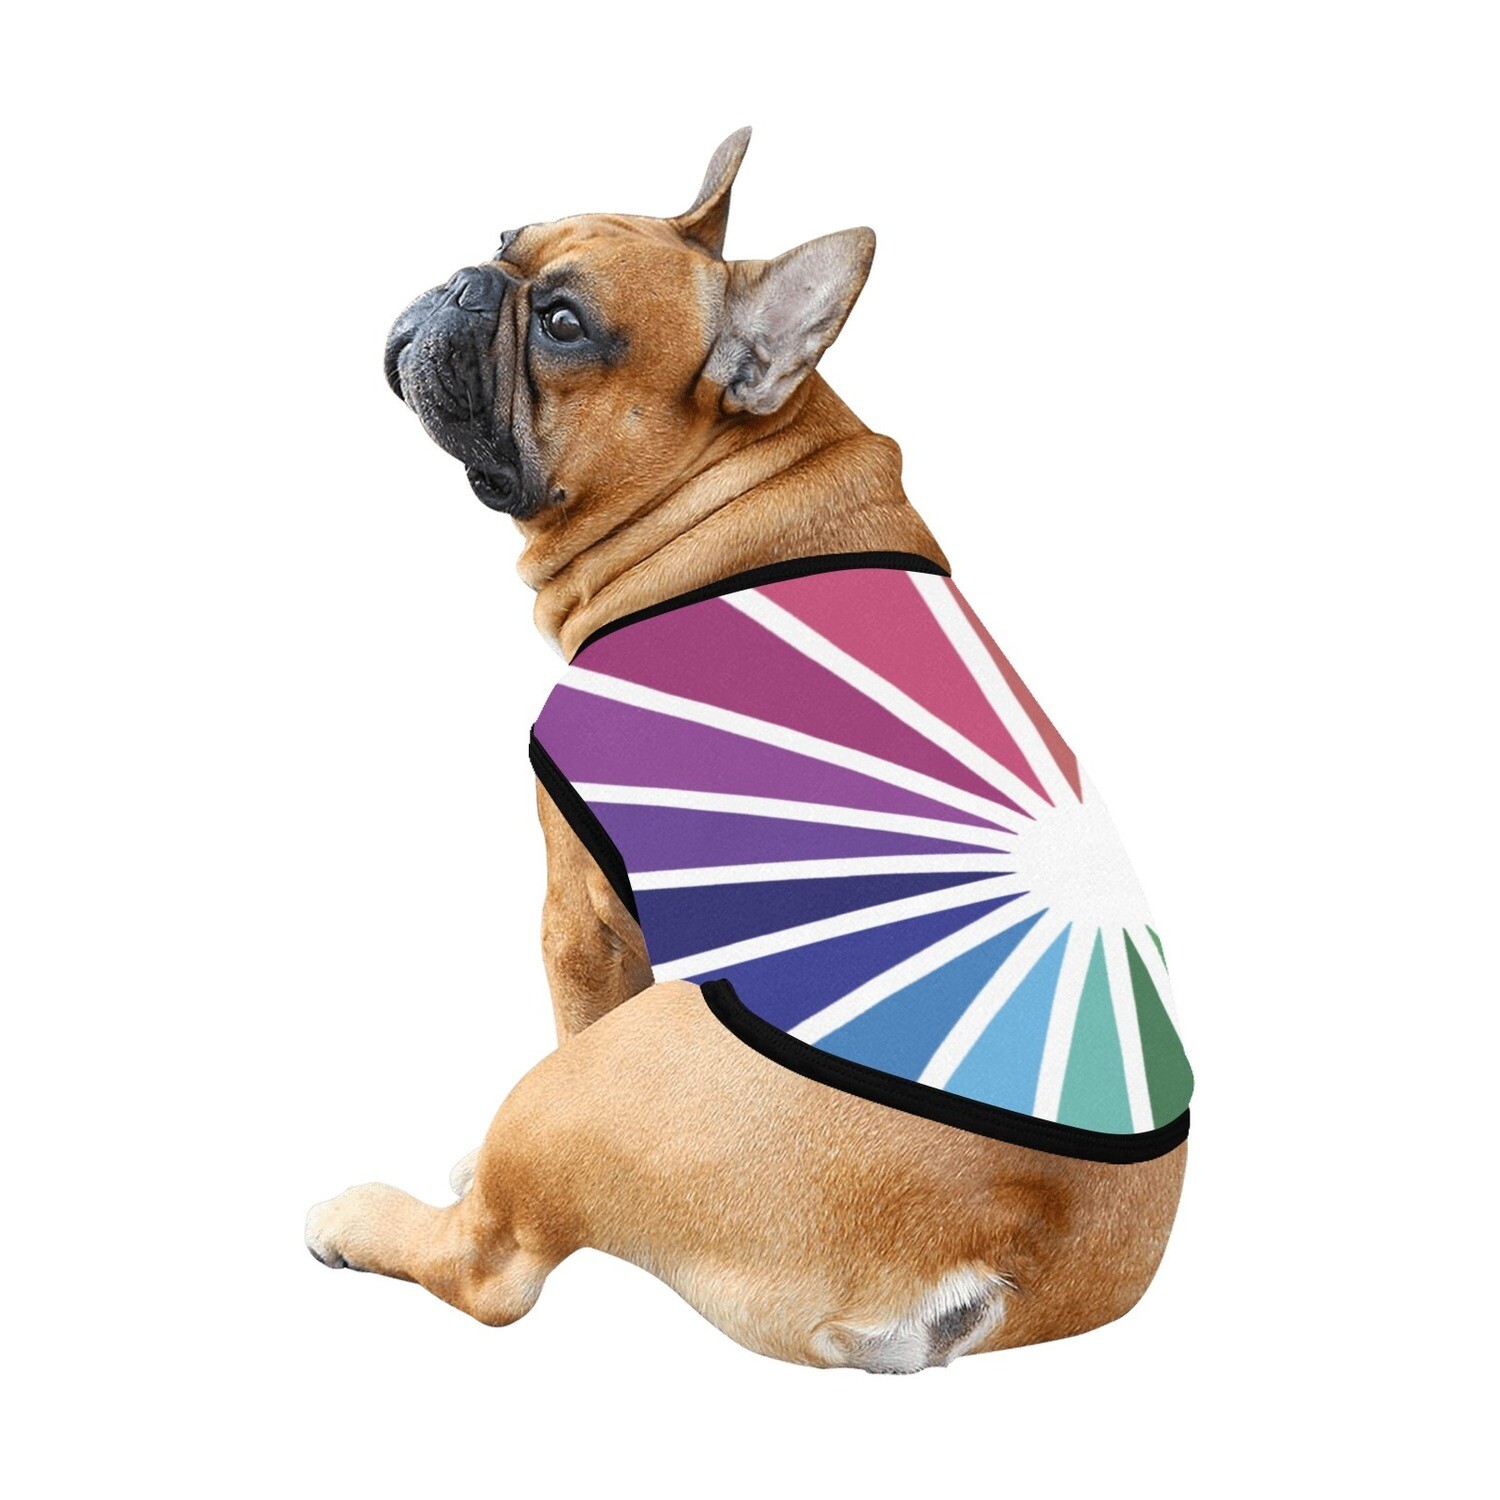 🐕🏳️‍🌈 Love is Love Spectrum, Dog Tank Top, Dog shirt, Dog t-shirt, Dog clothes, Dog clothing, 7 sizes XS to 3XL, Dog gift, Gift for dogs